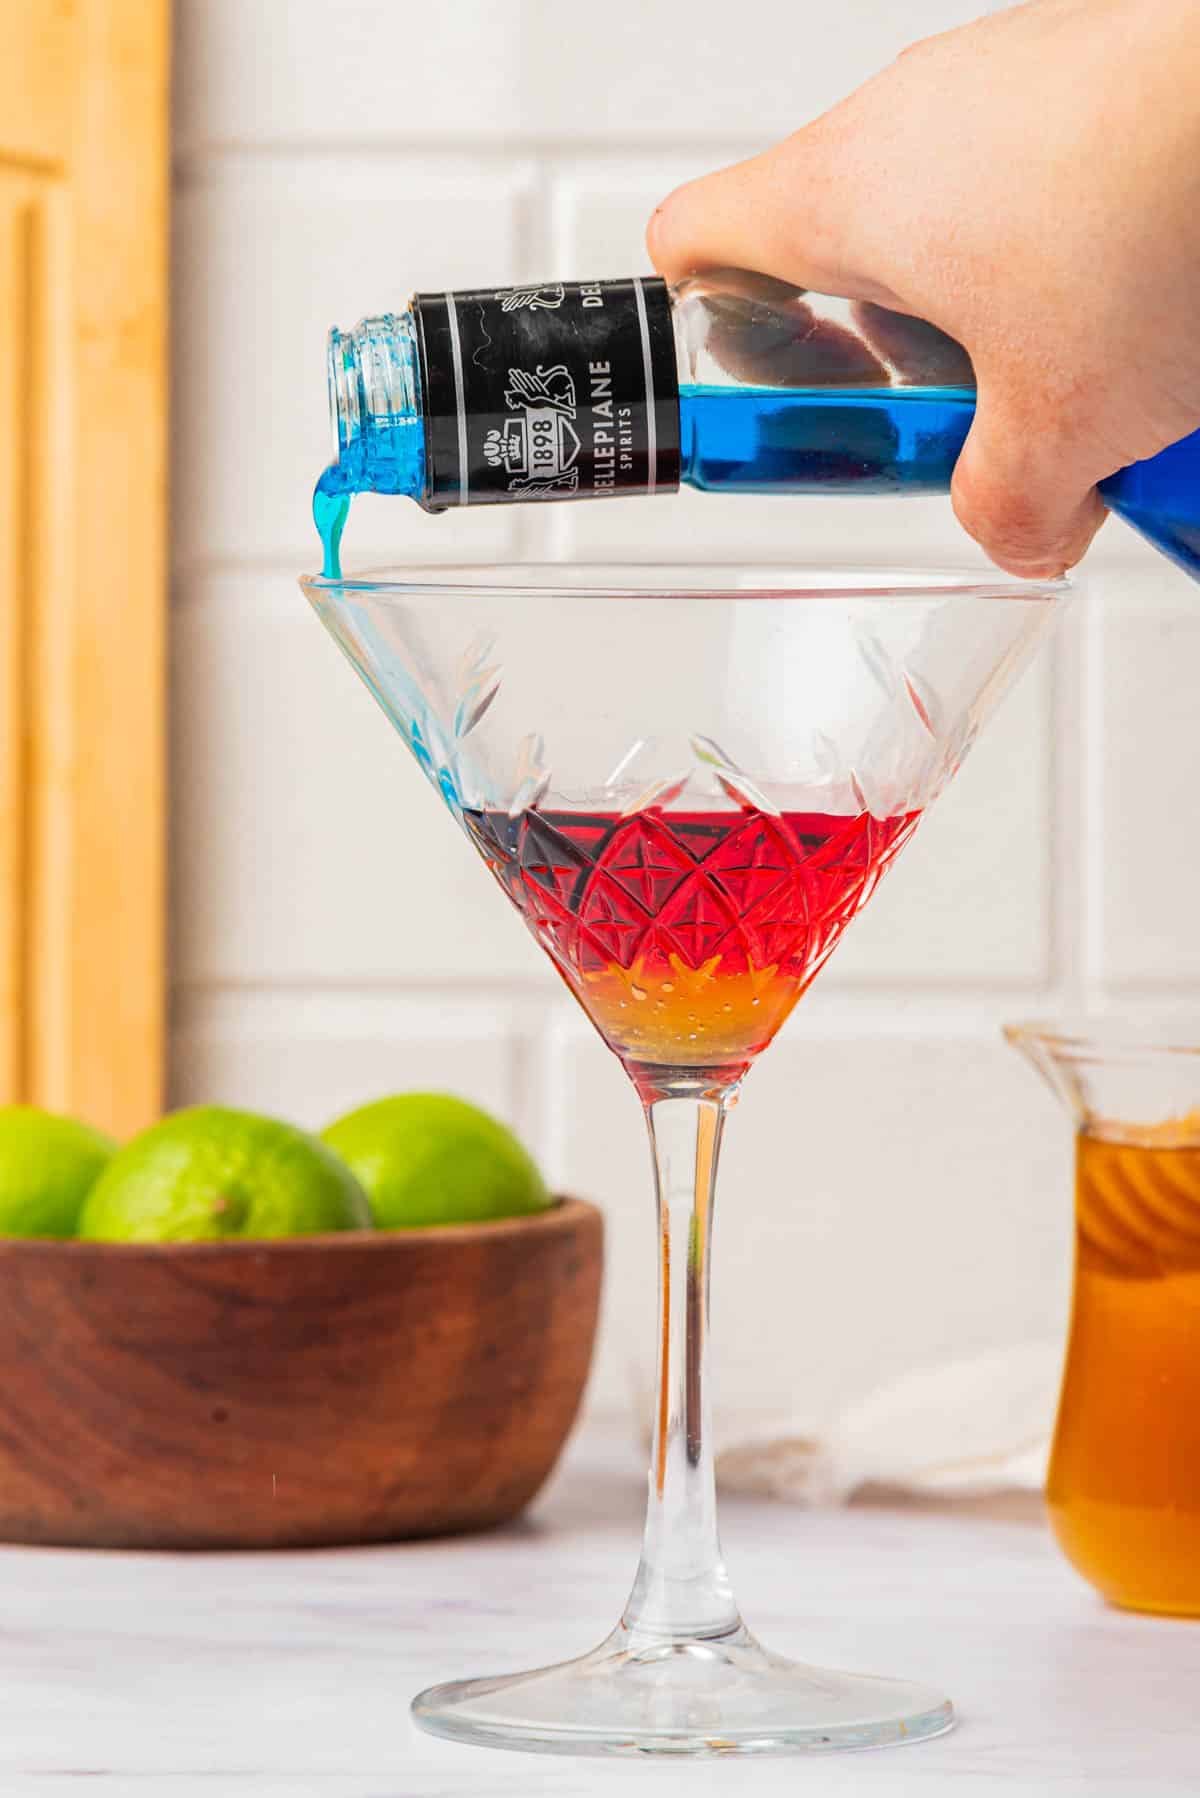 Pouring blue liquid into a martini glass over orange and red liquid with bowl of limes and cup of honey in background.